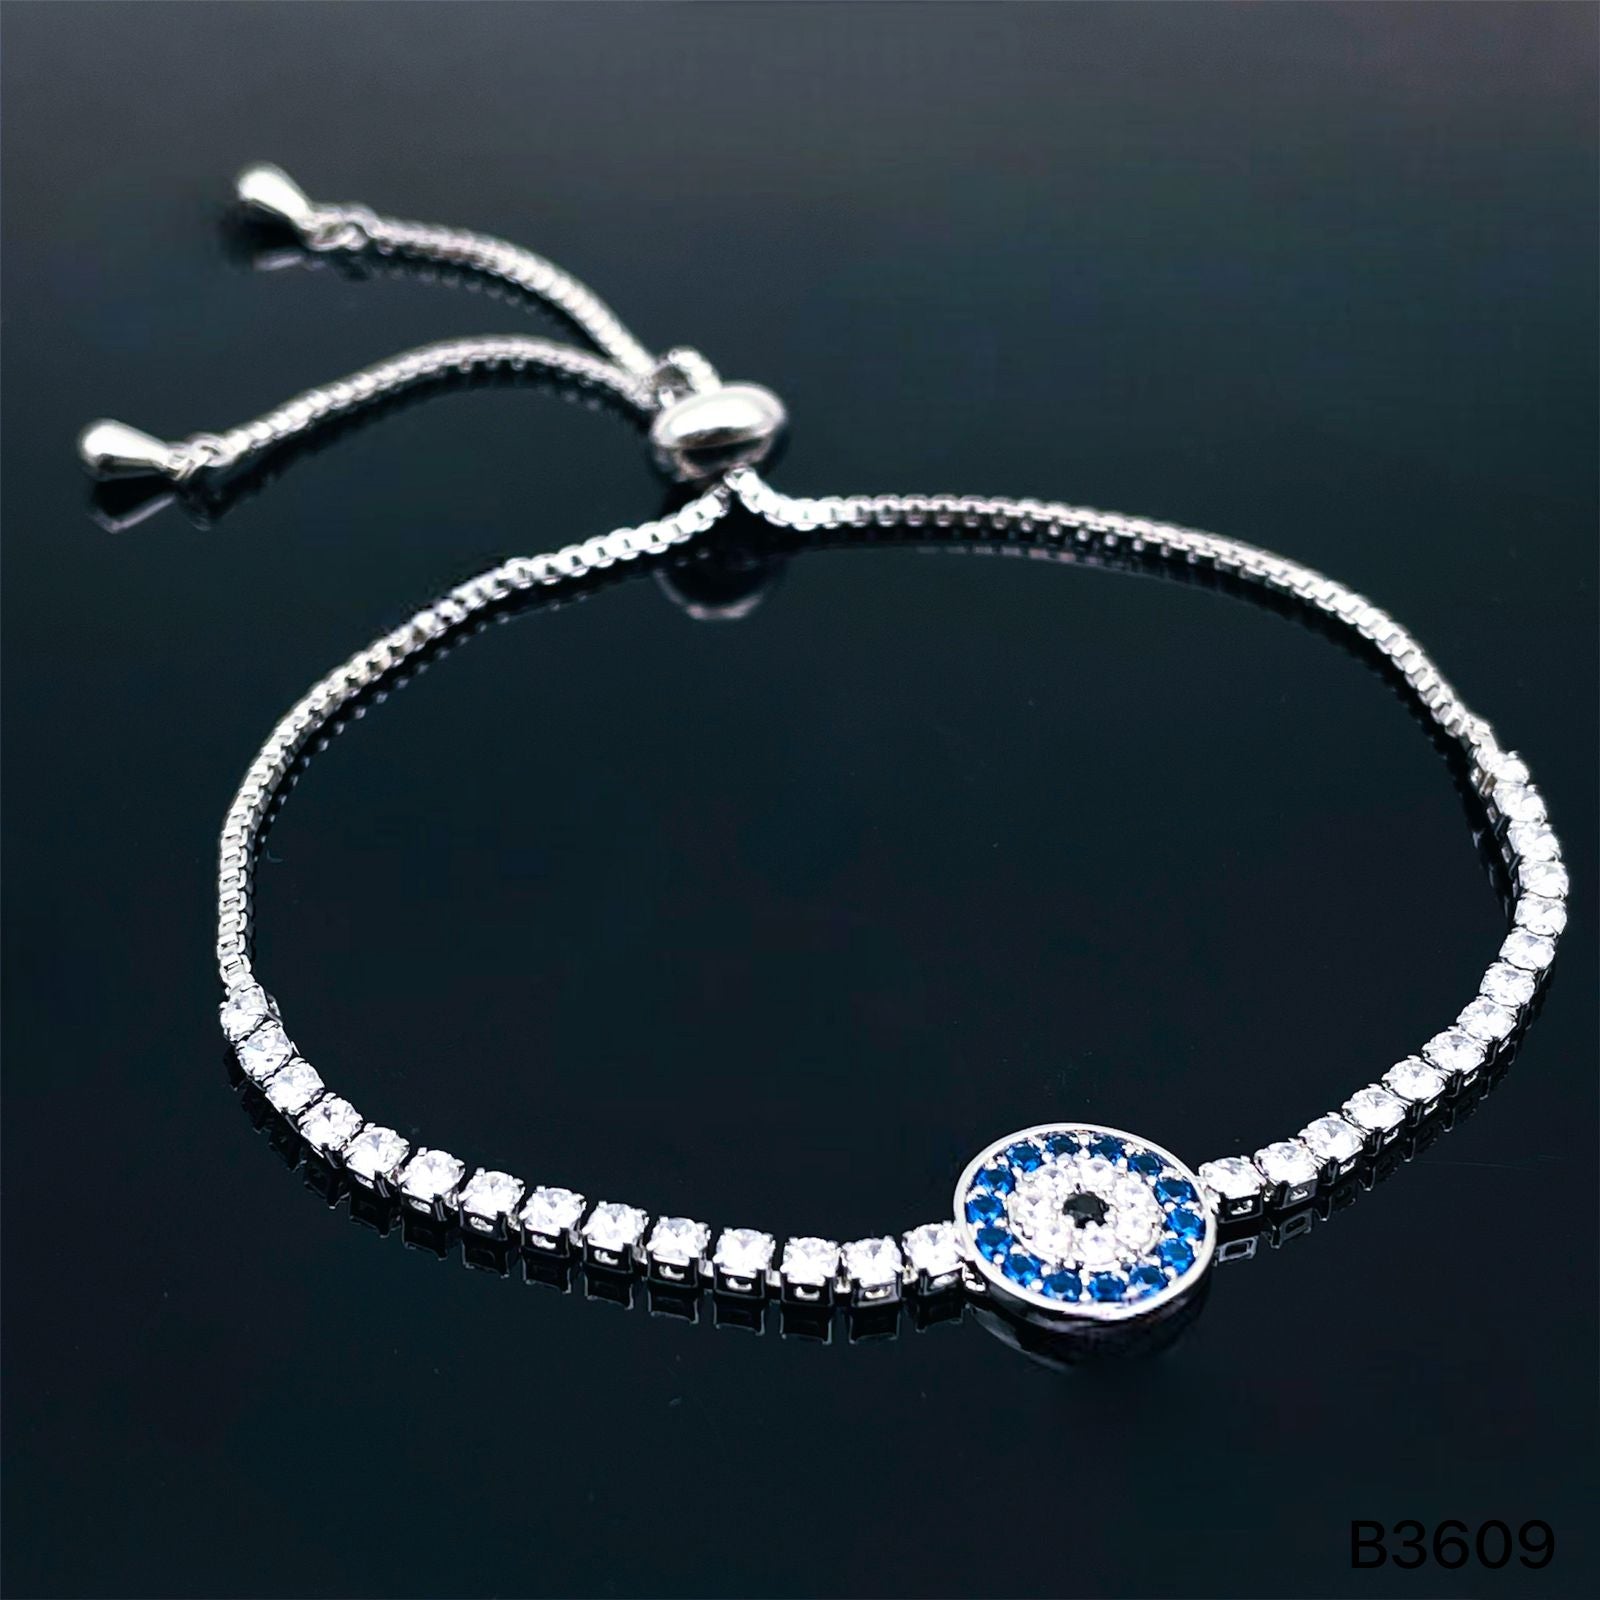 NEW Fashion 925 Sterling Silver Hand Chain Bracelets Original Box For  Pandora Moments Snake Chain Slider Bracelet Women Gift Jewelry From  Licuiip, $13.21 | DHgate.Com